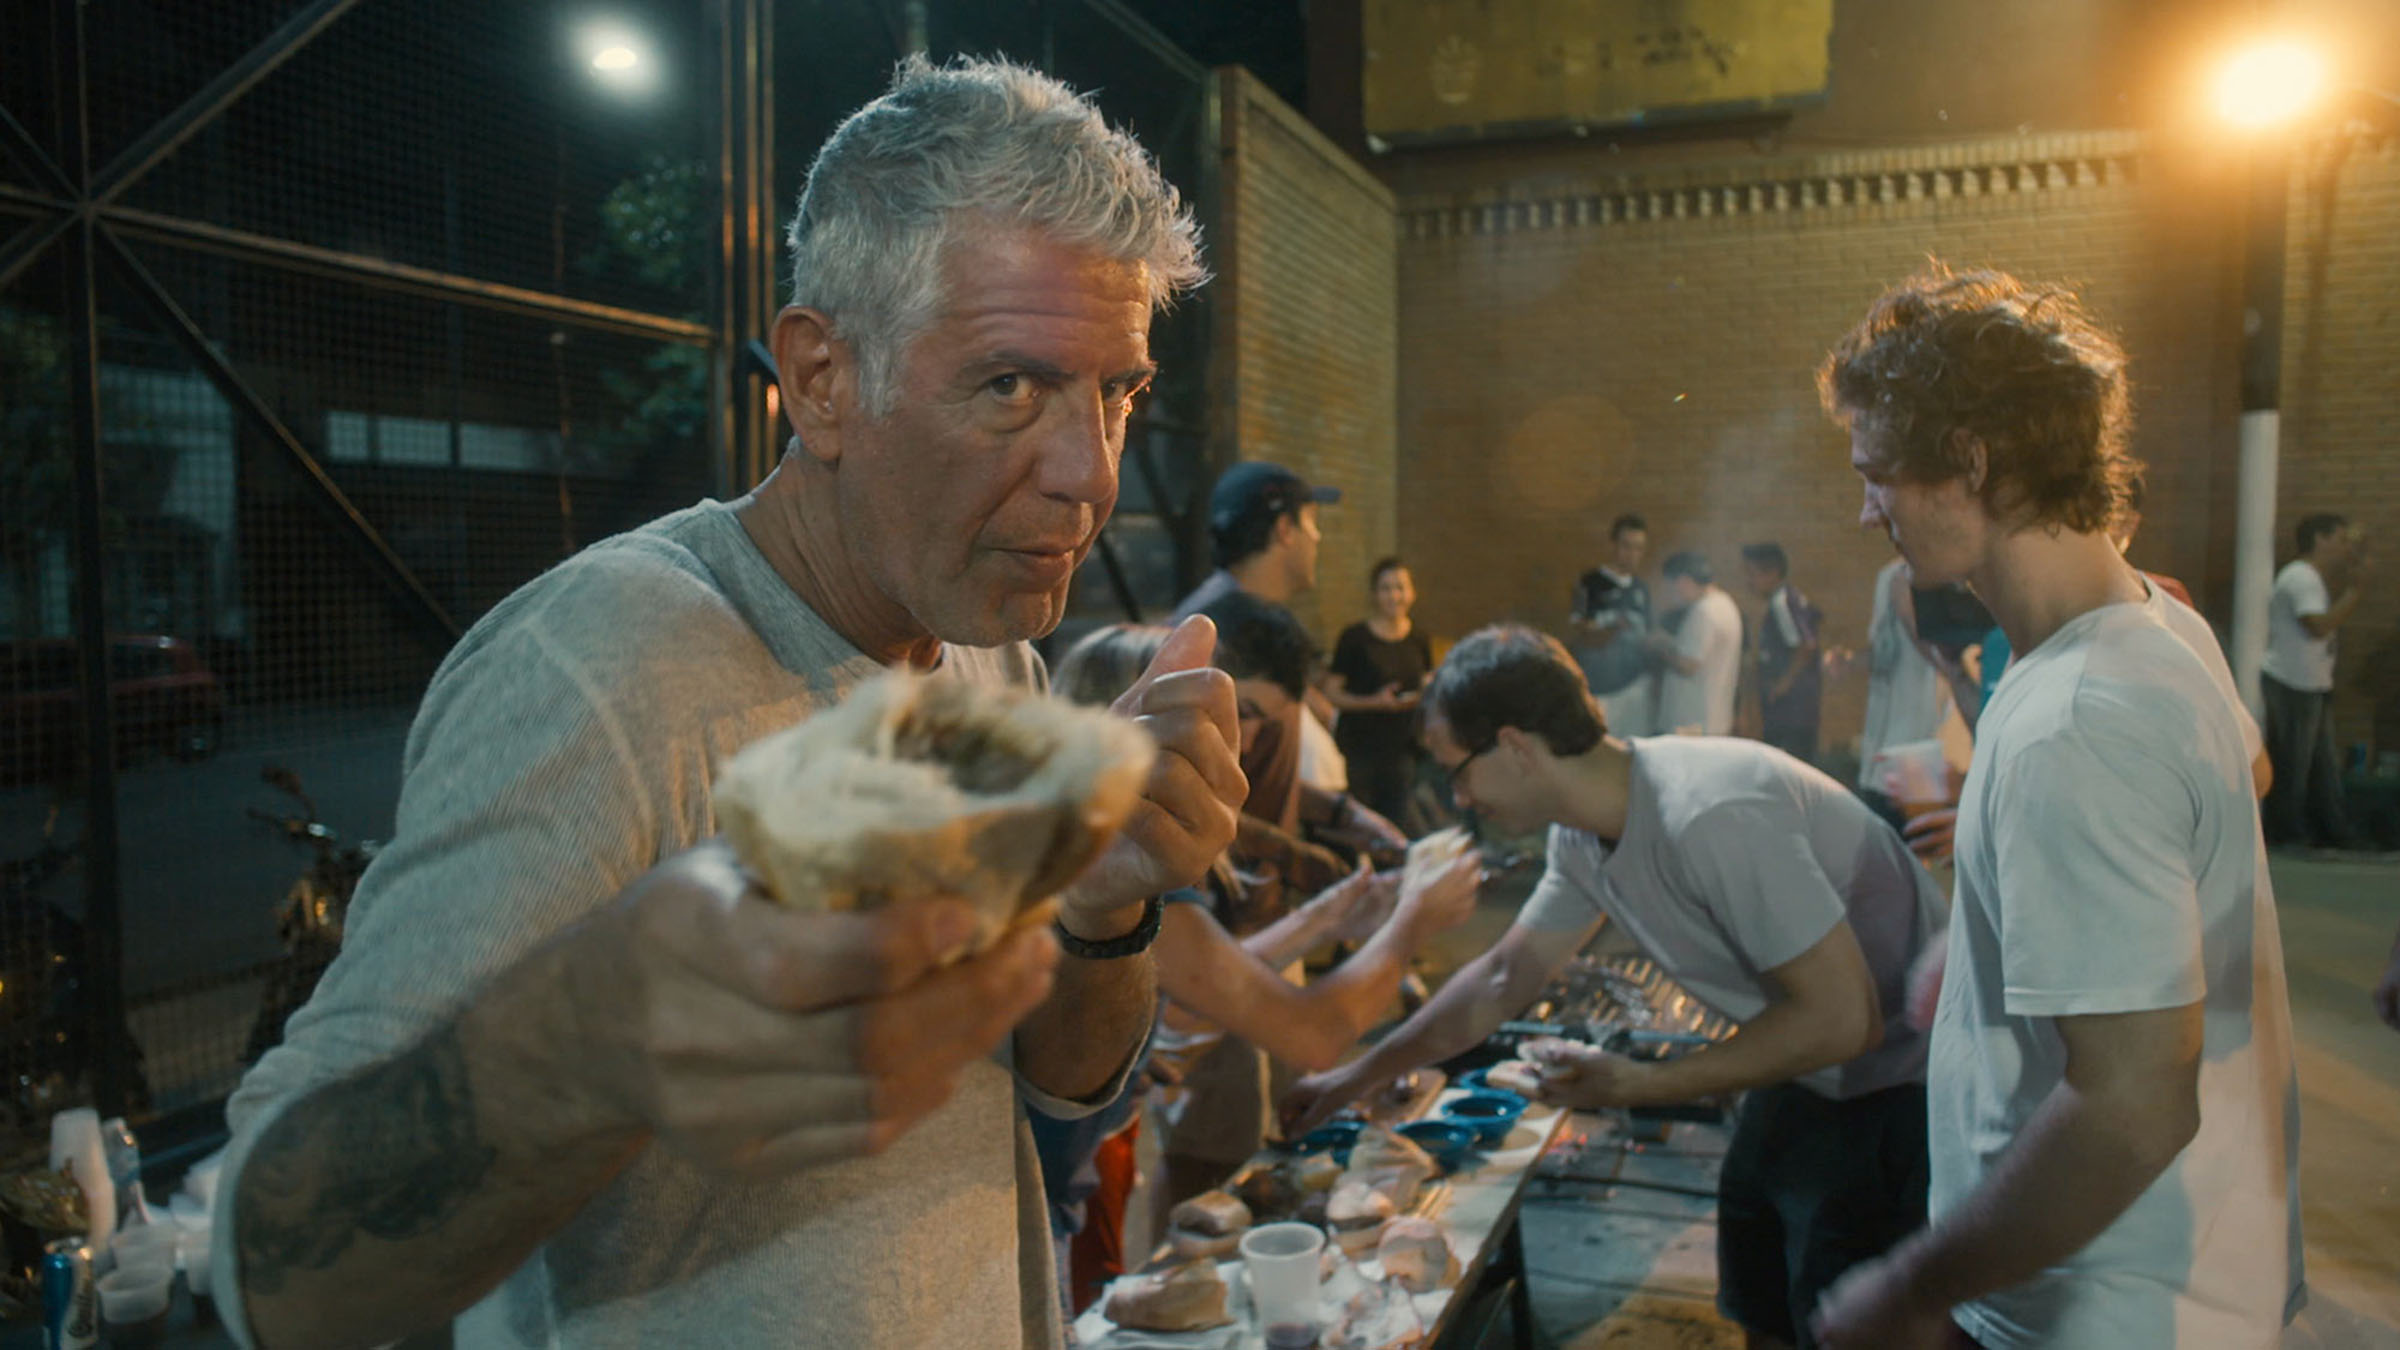 Art of the Cut: Building the Story Anthony Bourdain Couldn’t Share